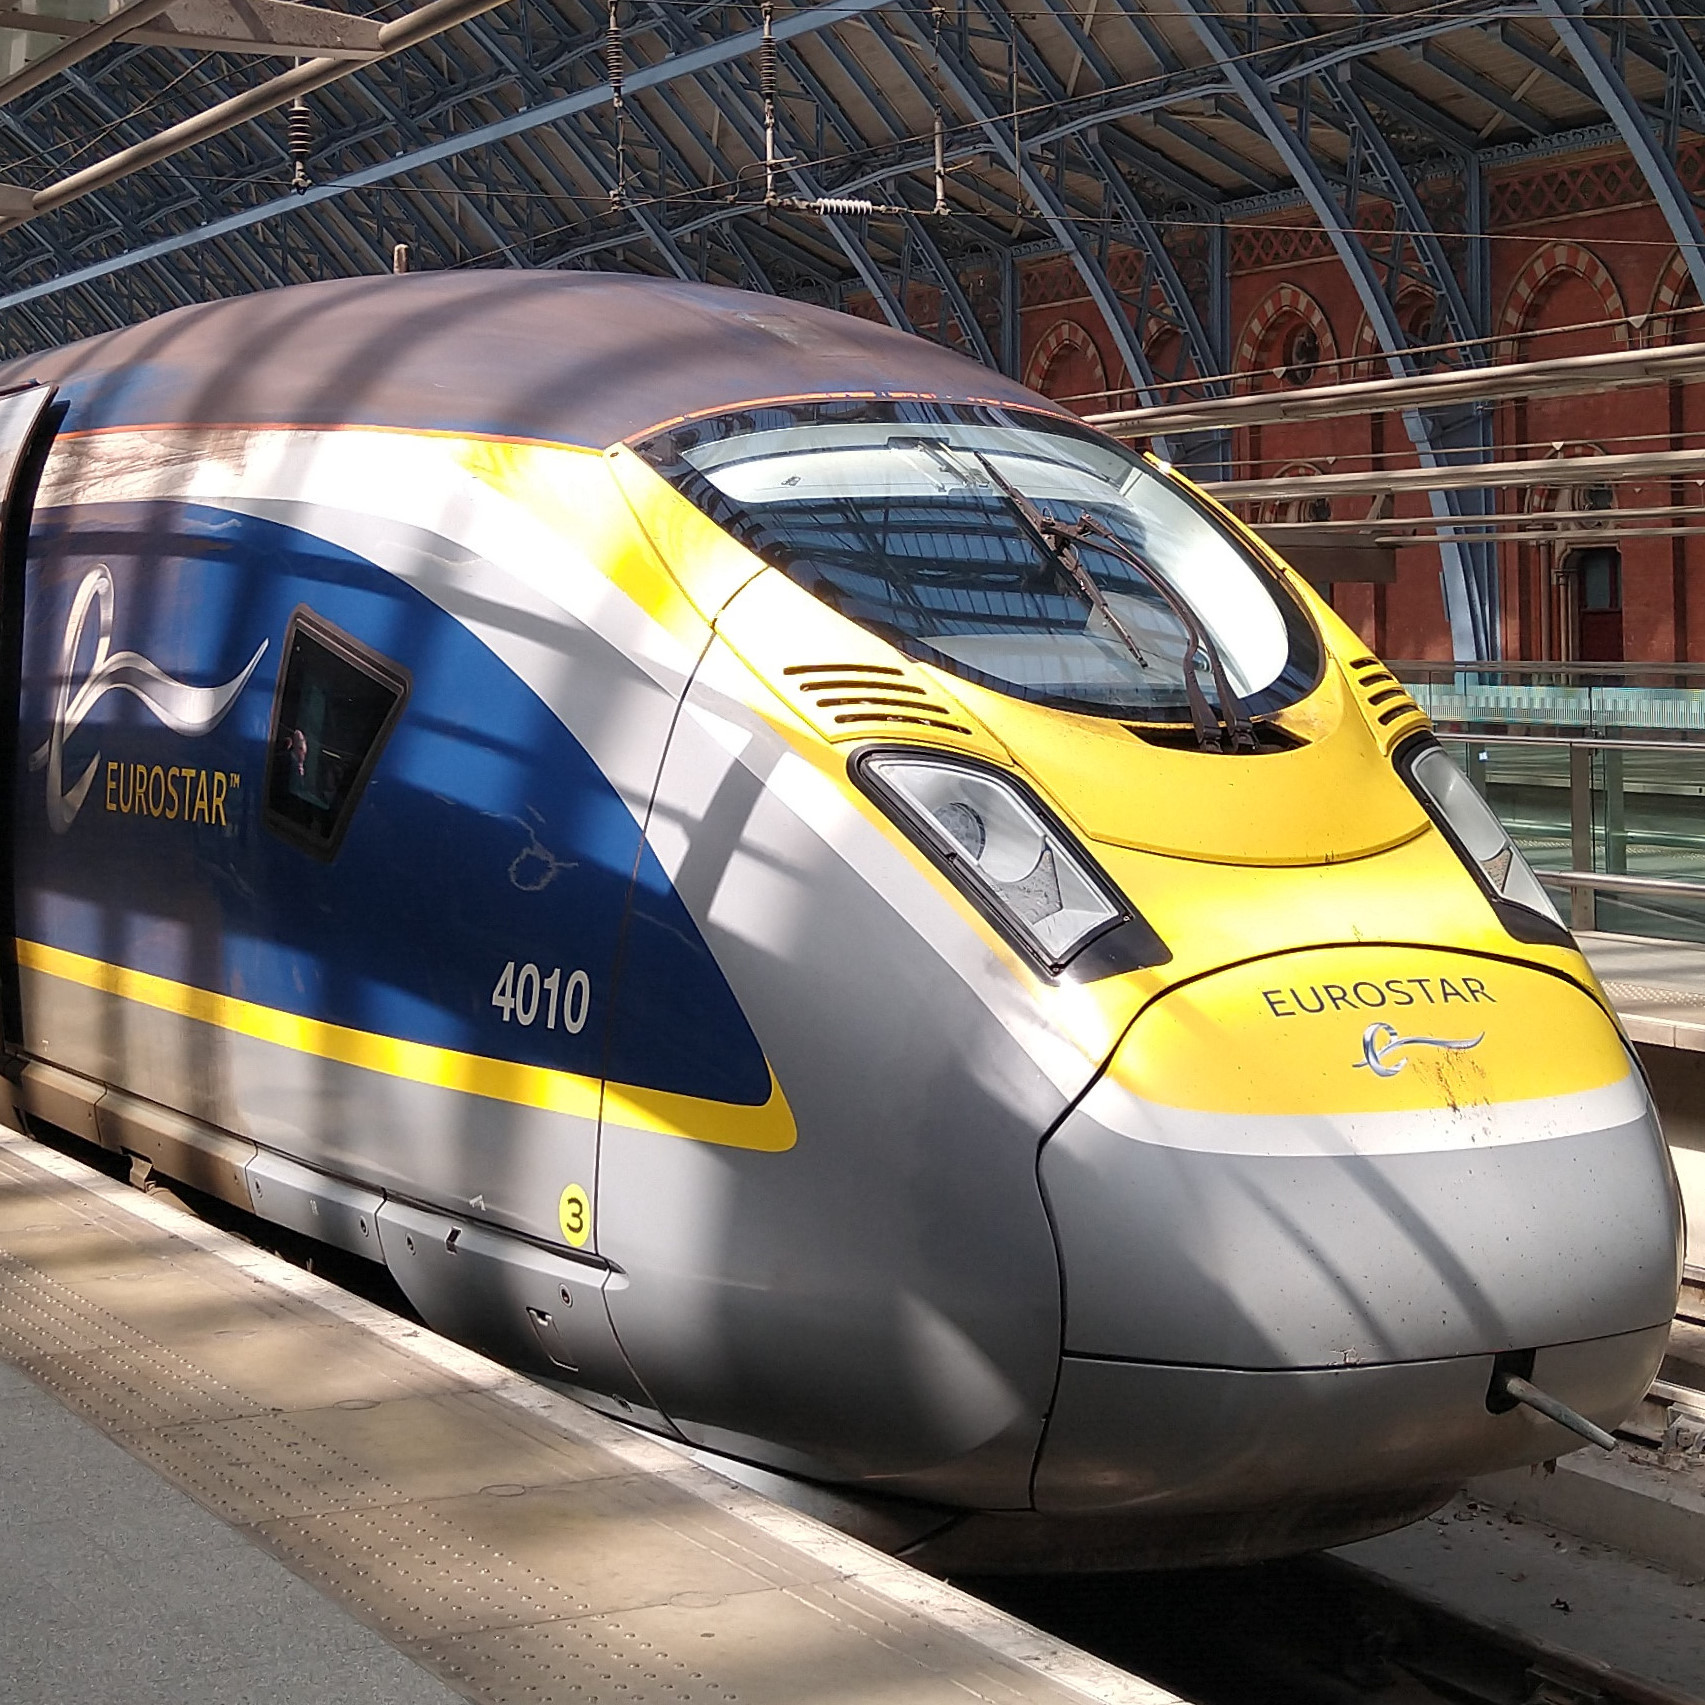 Eurostar e320 No. 4010 standing in the sun at London St Pancras, having just brought me back to the UK from Brussels.